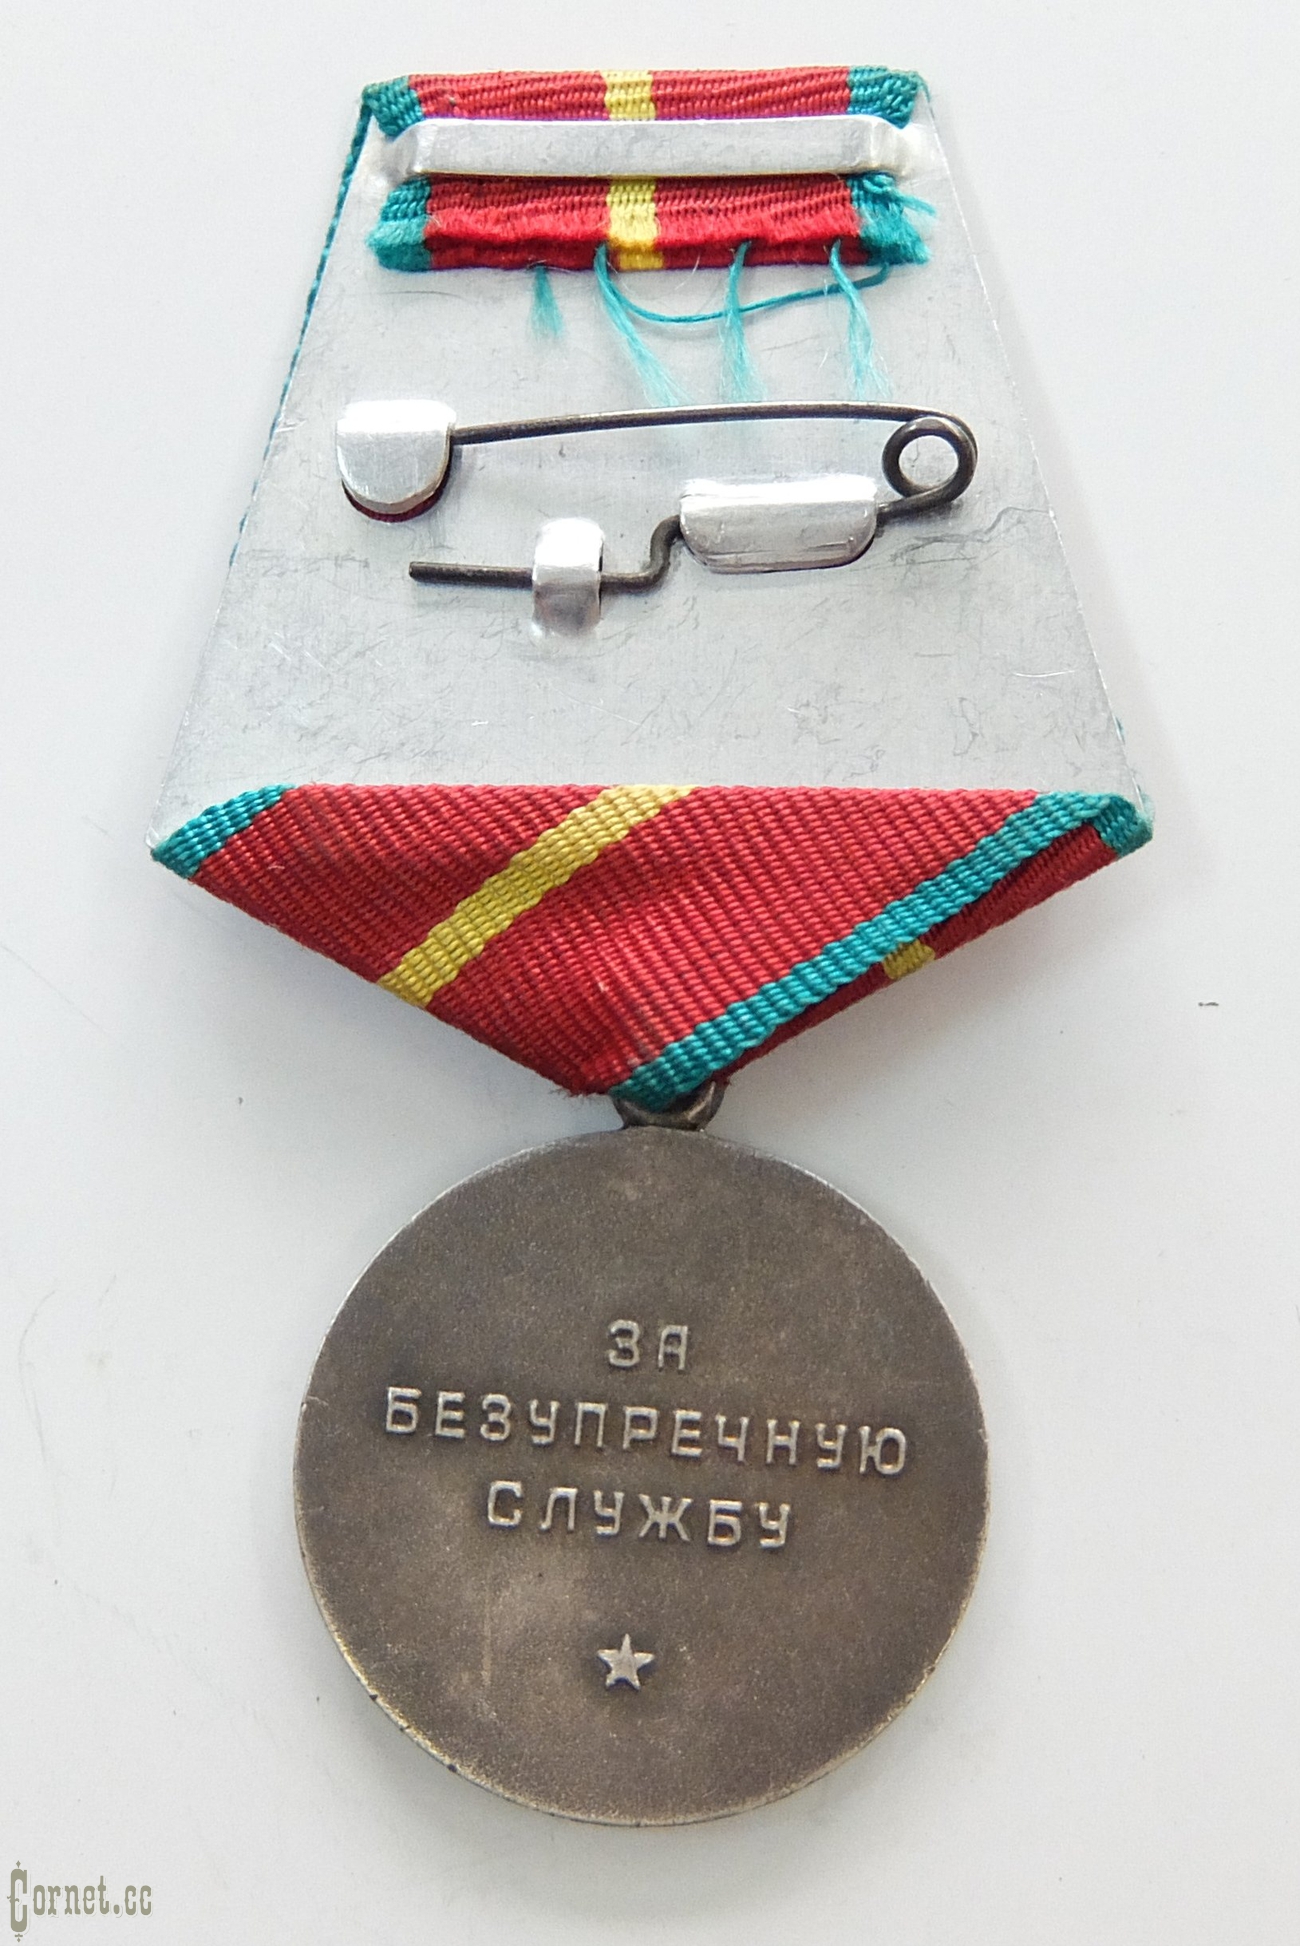 Silver medal "XX years of impeccable service in the KGB"